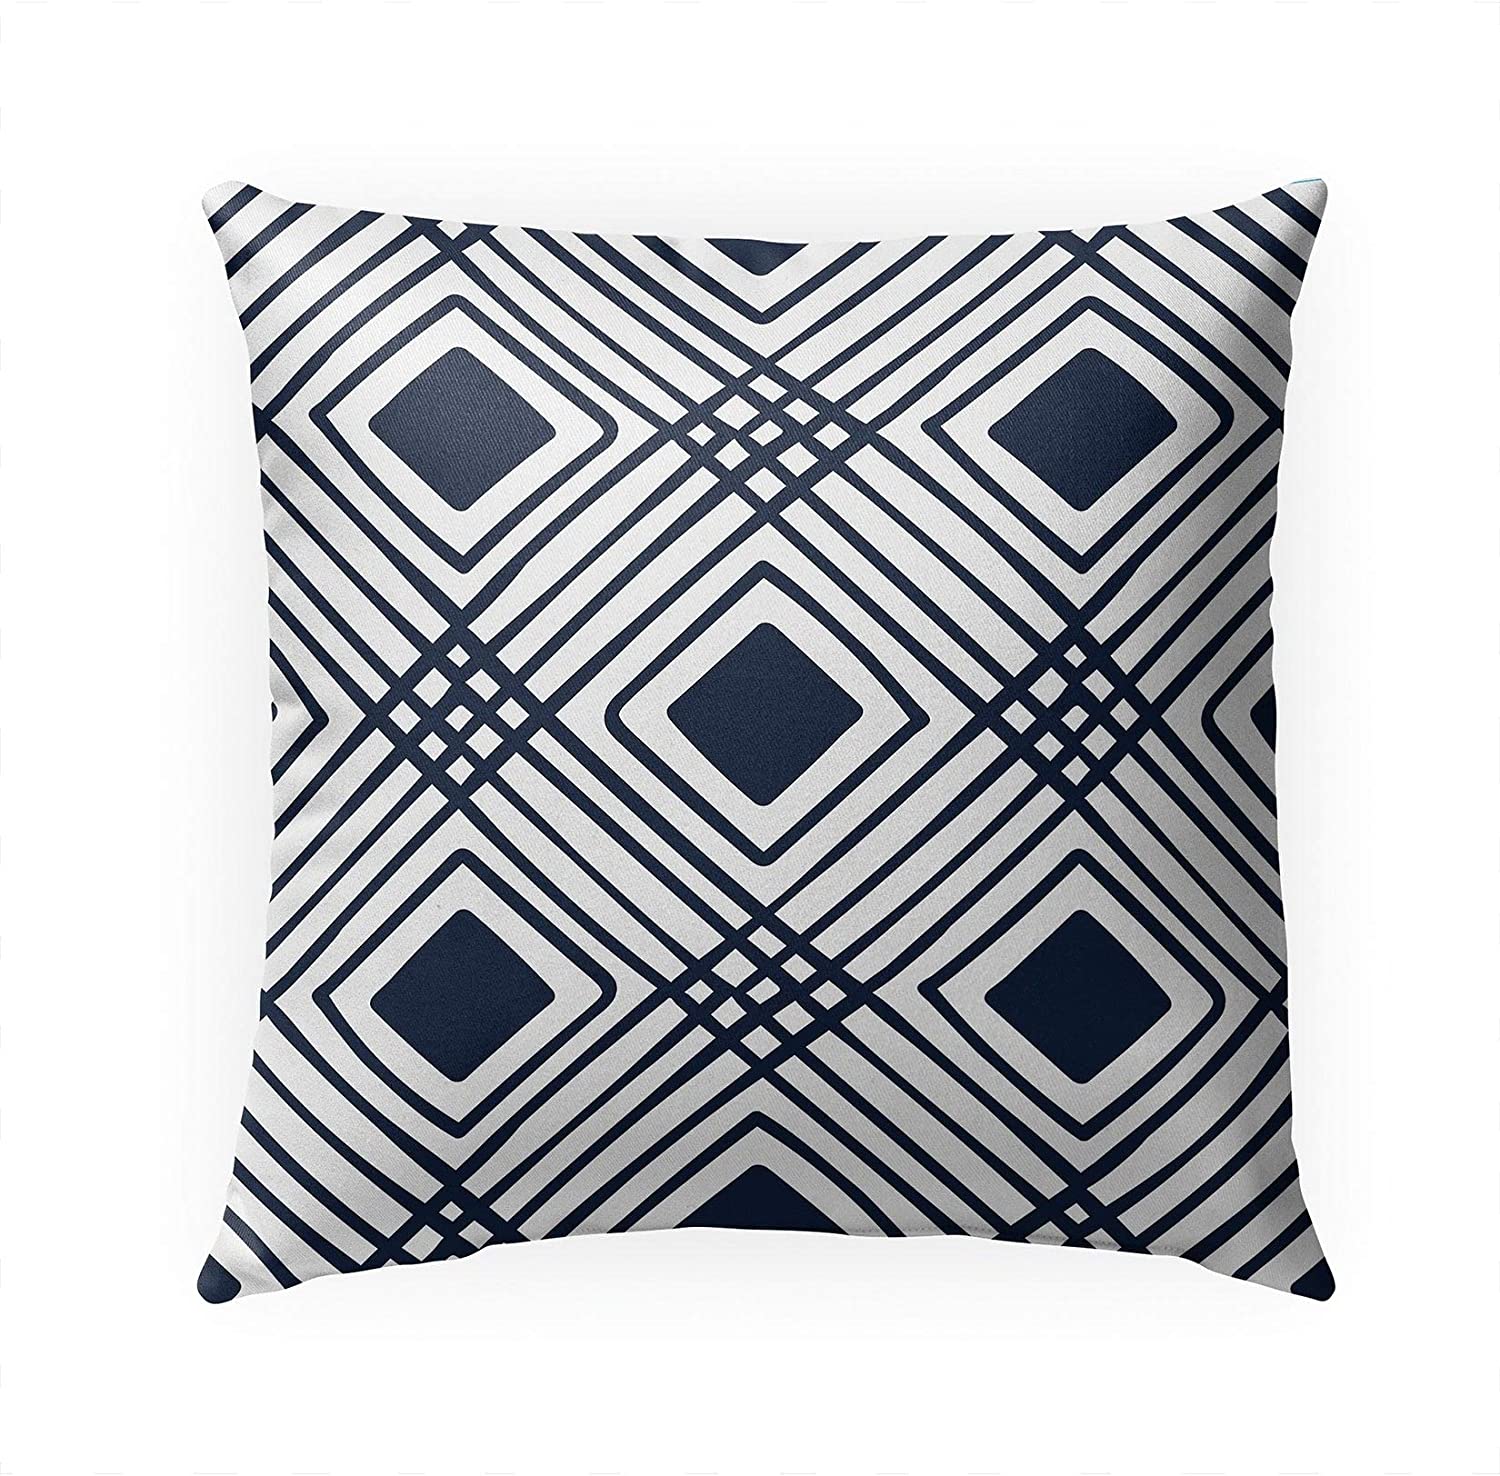 MISC Cross Diamonds Navy Indoor|Outdoor Pillow by 18x18 Blue Geometric Transitional Polyester Removable Cover